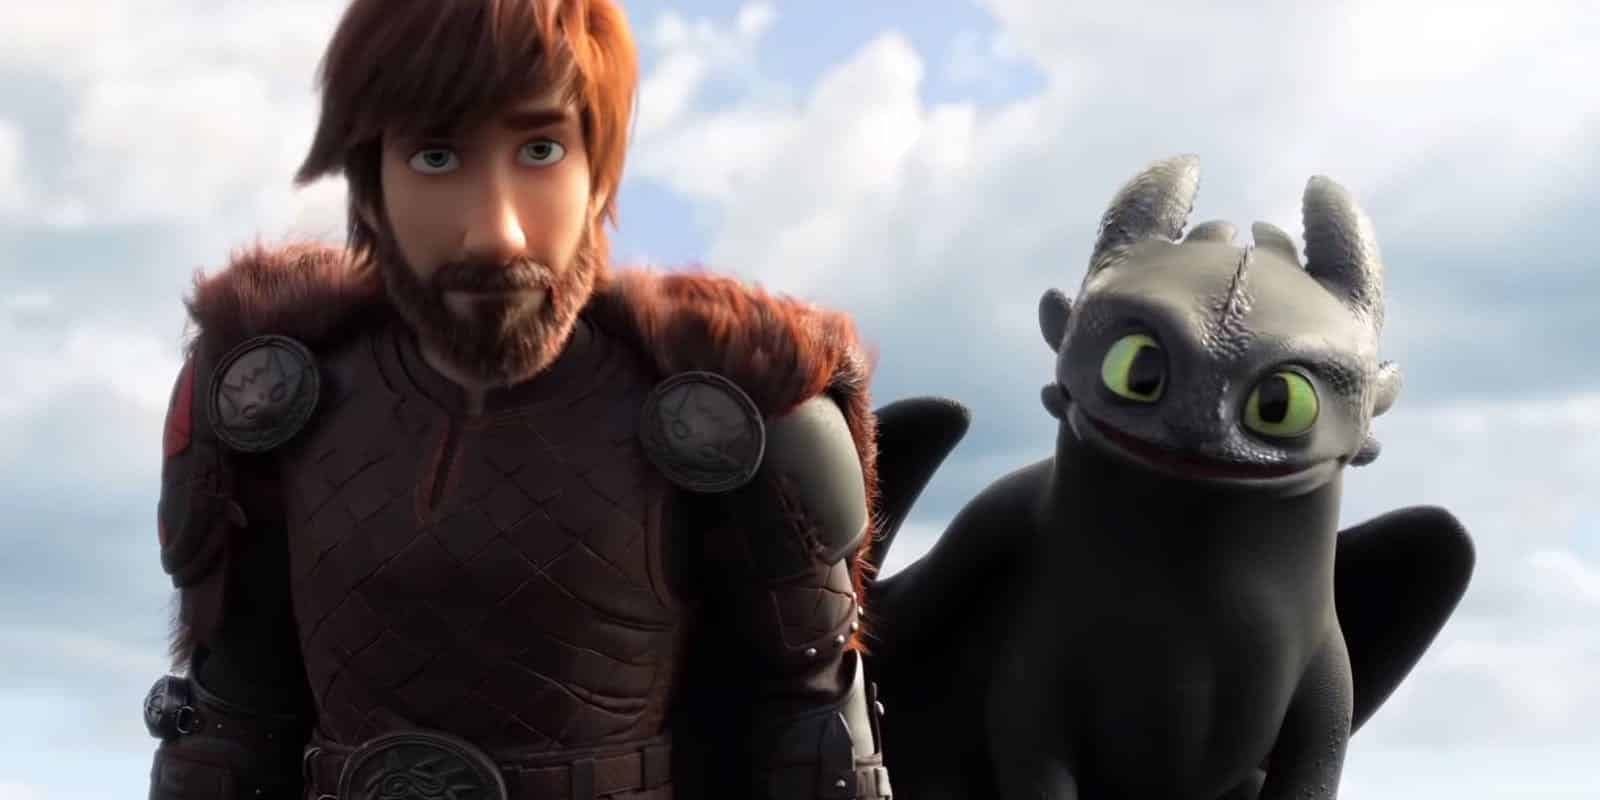 How to Train Your Dragon: The Hidden World Director on How the Series Could Continue